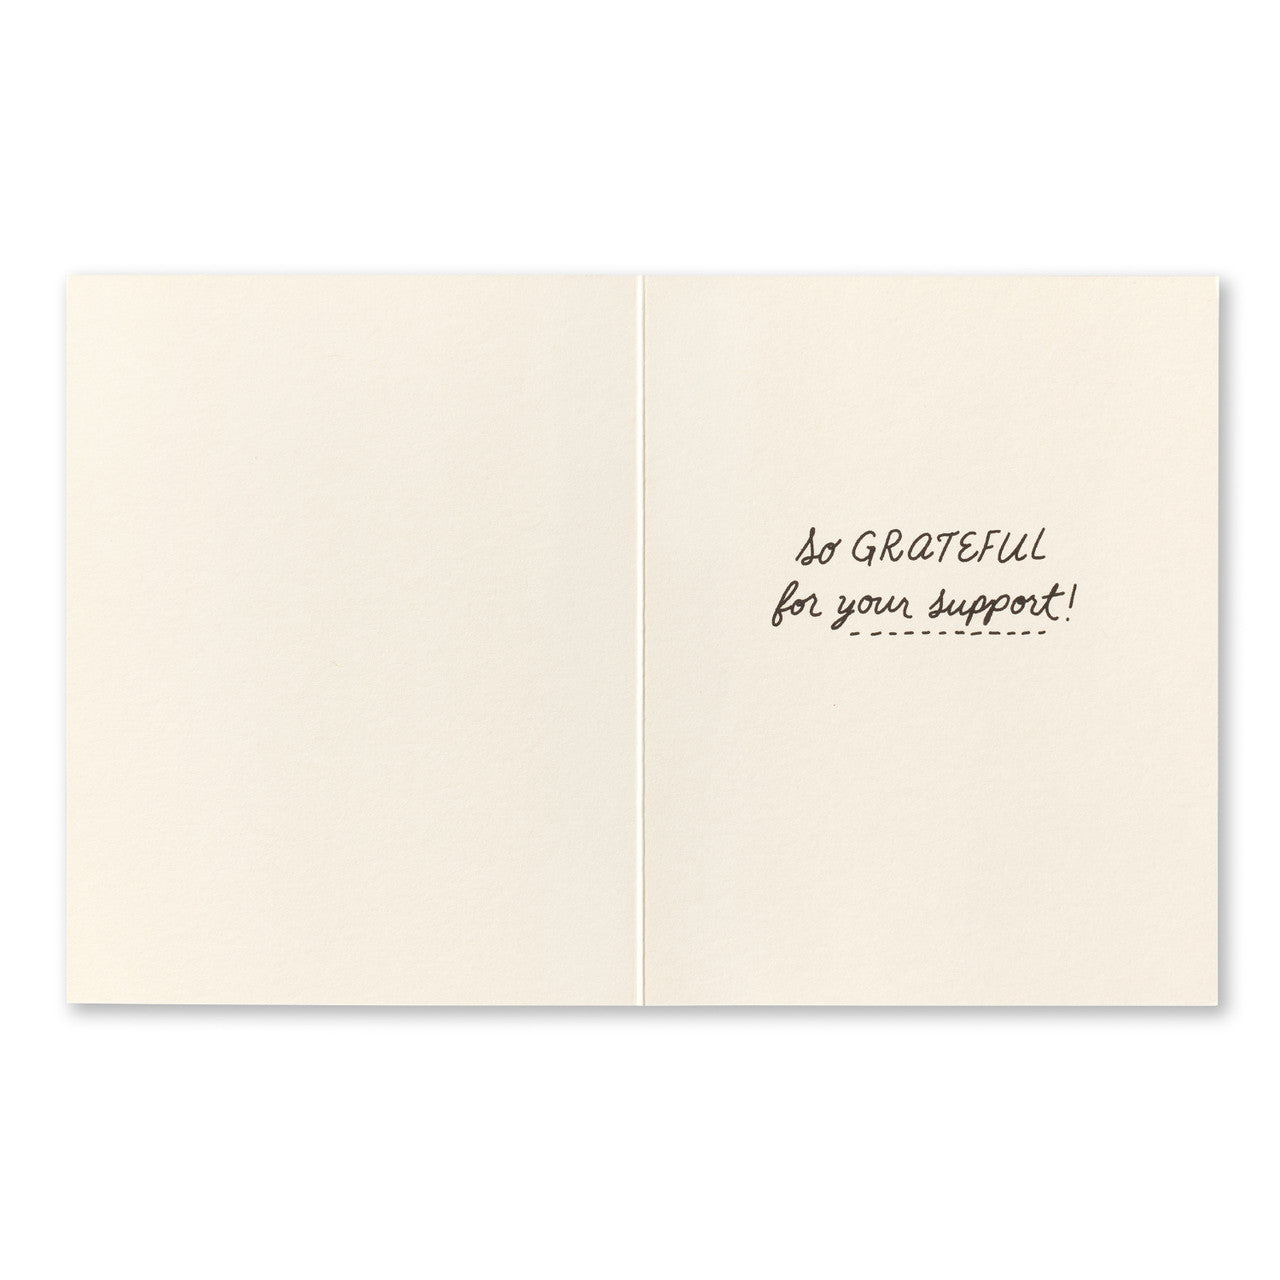 Love Muchly Greeting Card - Thank You - Just a brief thank you - Mellow Monkey